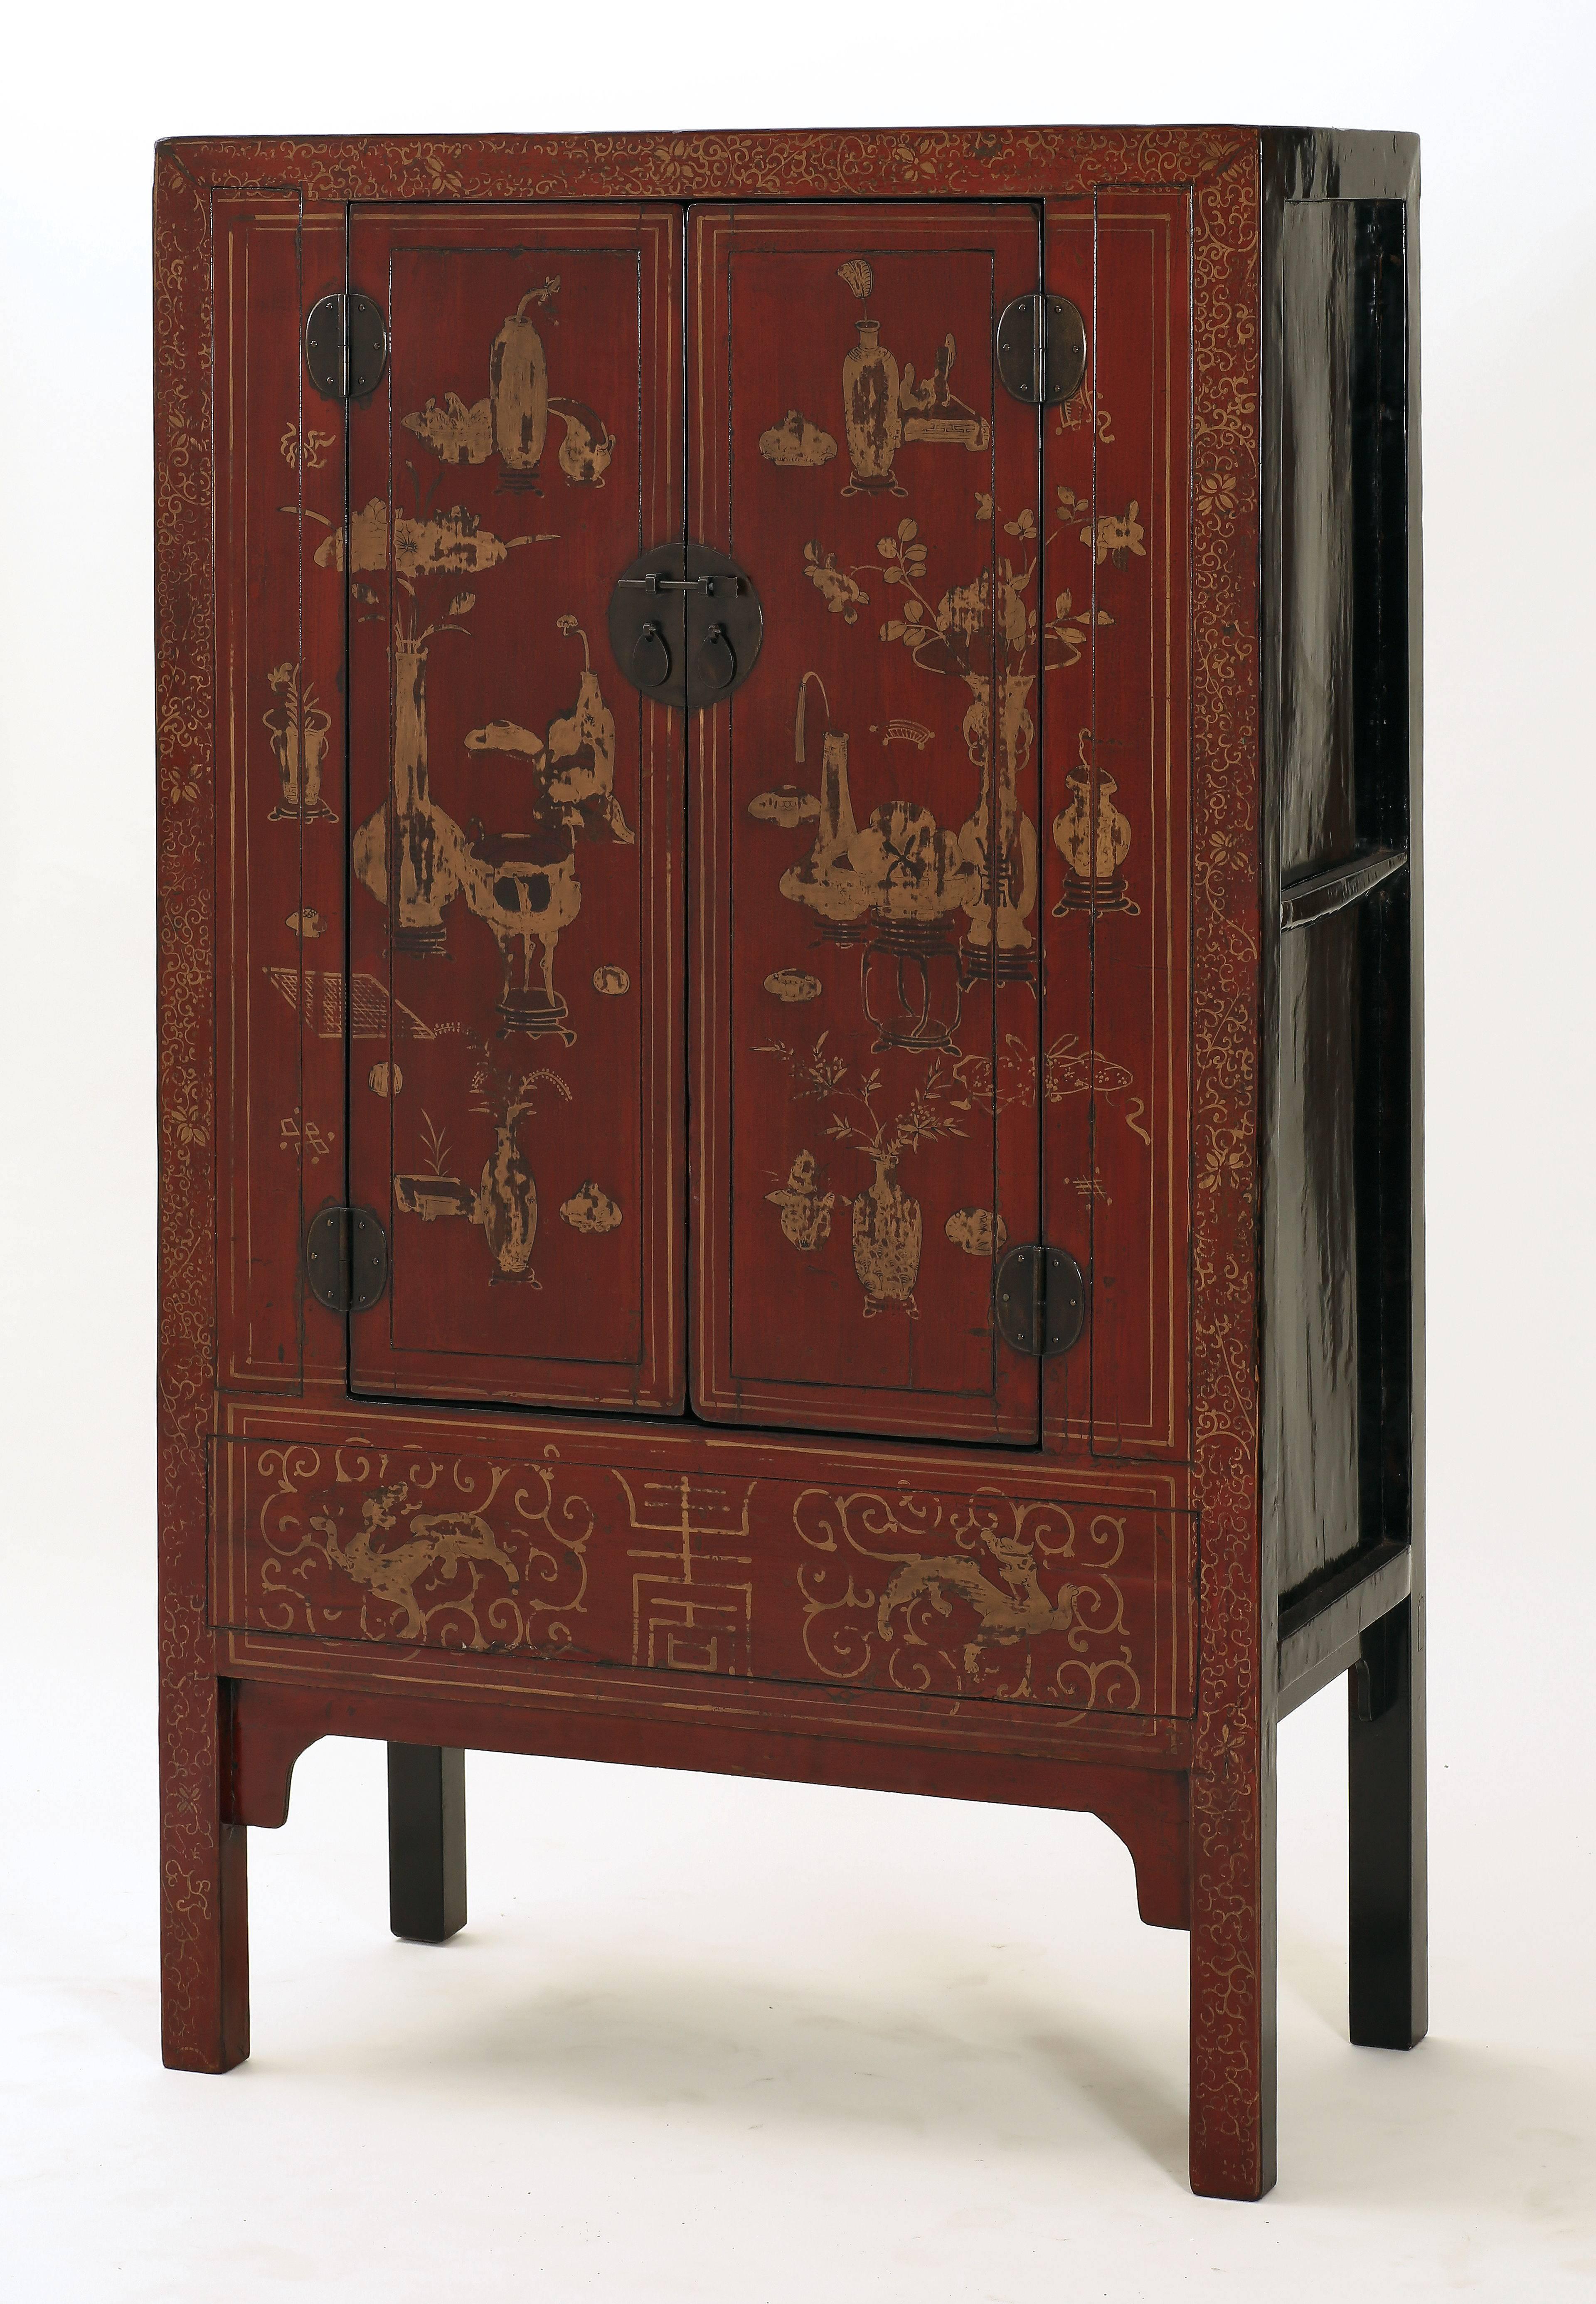 Chinoiserie Antique Red Lacquer Gilt Painted Chinese Compound Cabinet, Scholastic Art